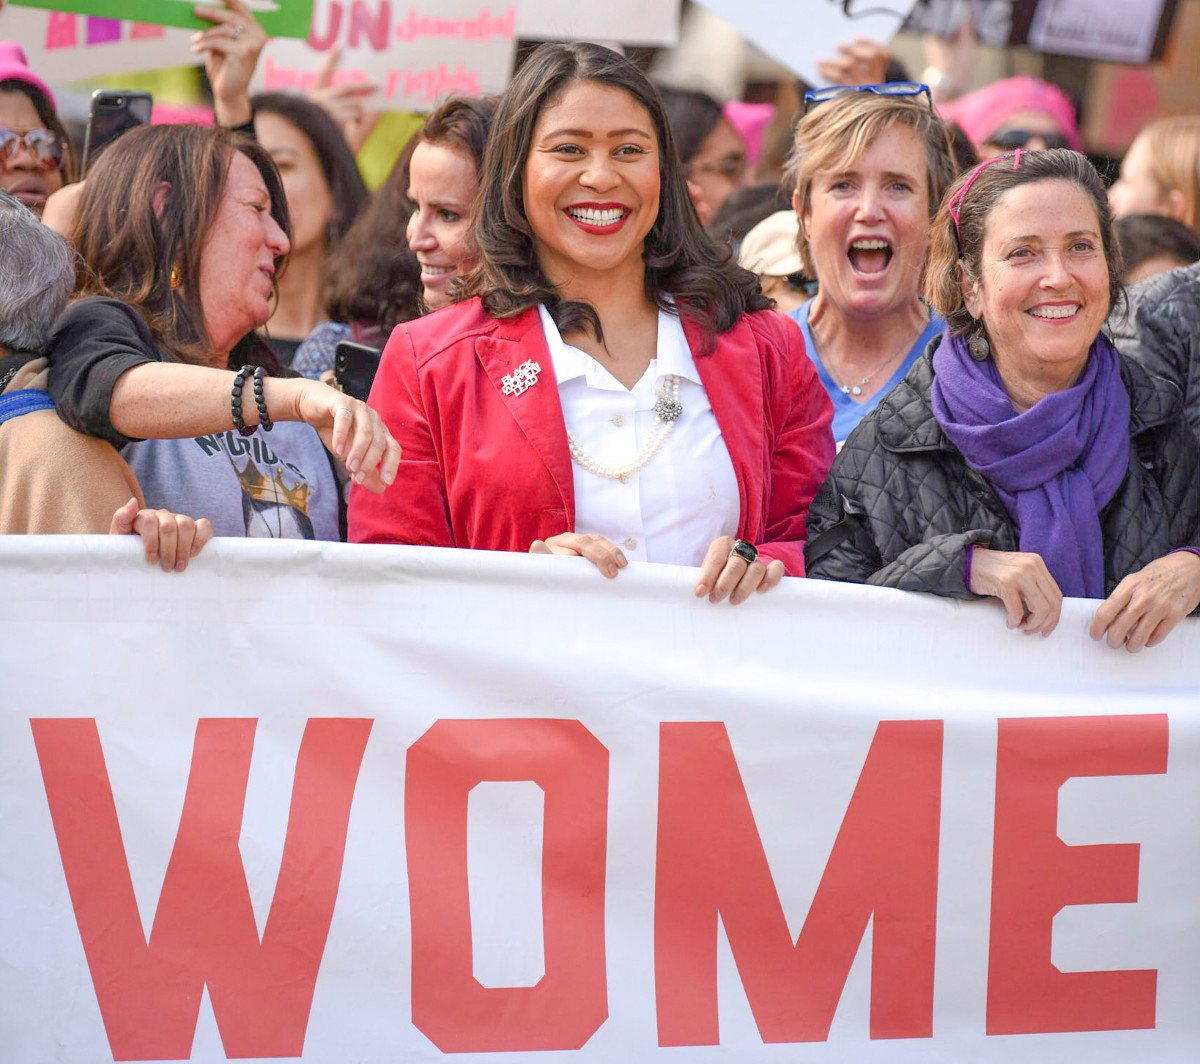 Mayor London Breed at the 2019 Women's March